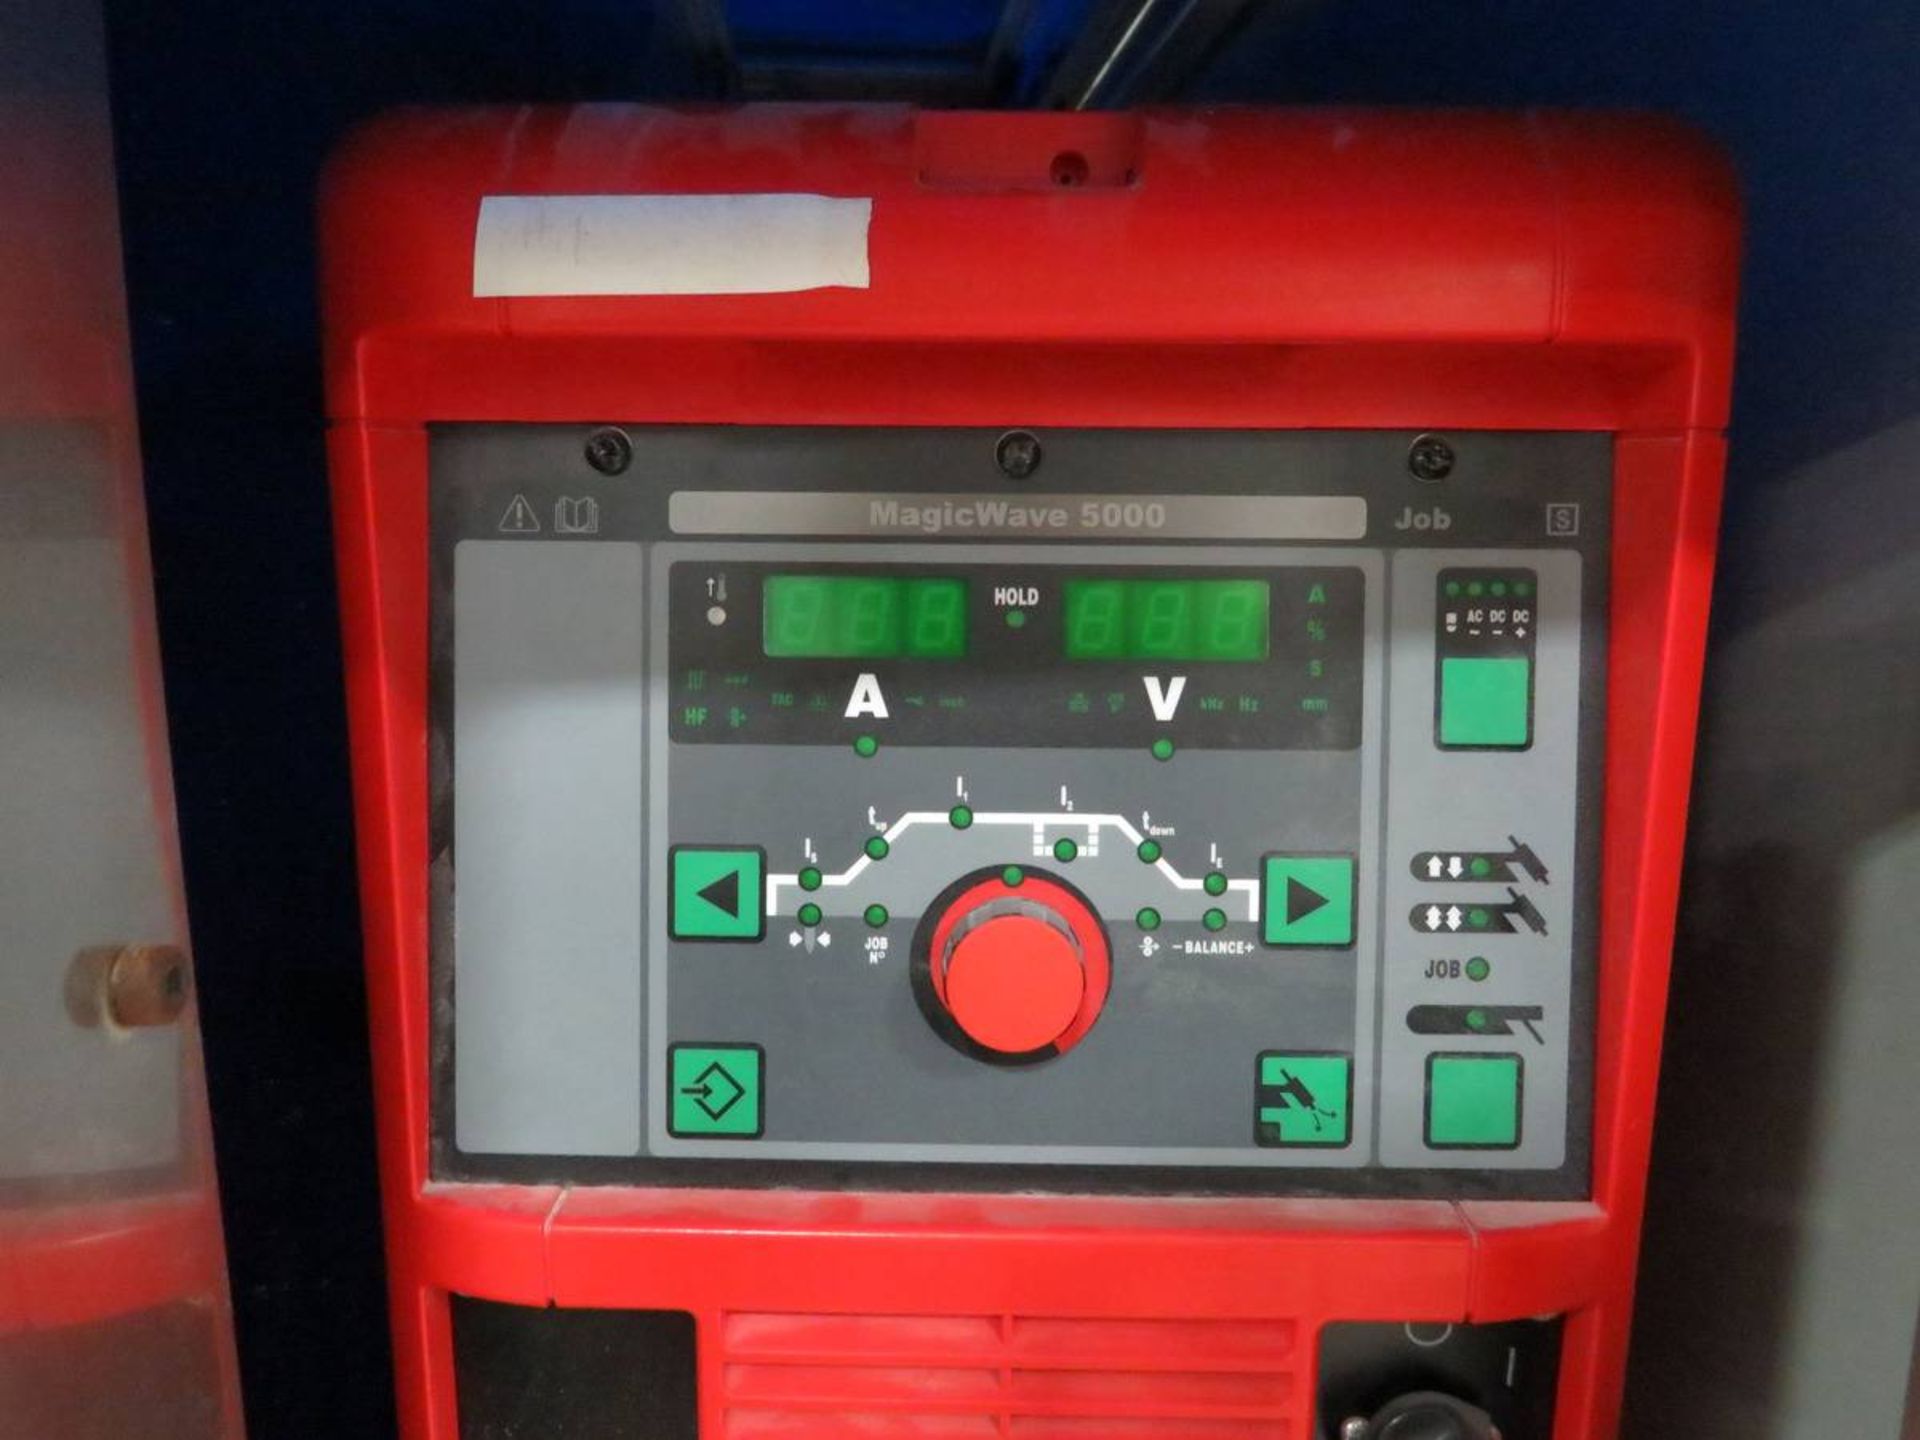 2011 Fronius MagicWave 5000 Tig Welding Power Source - Image 2 of 4